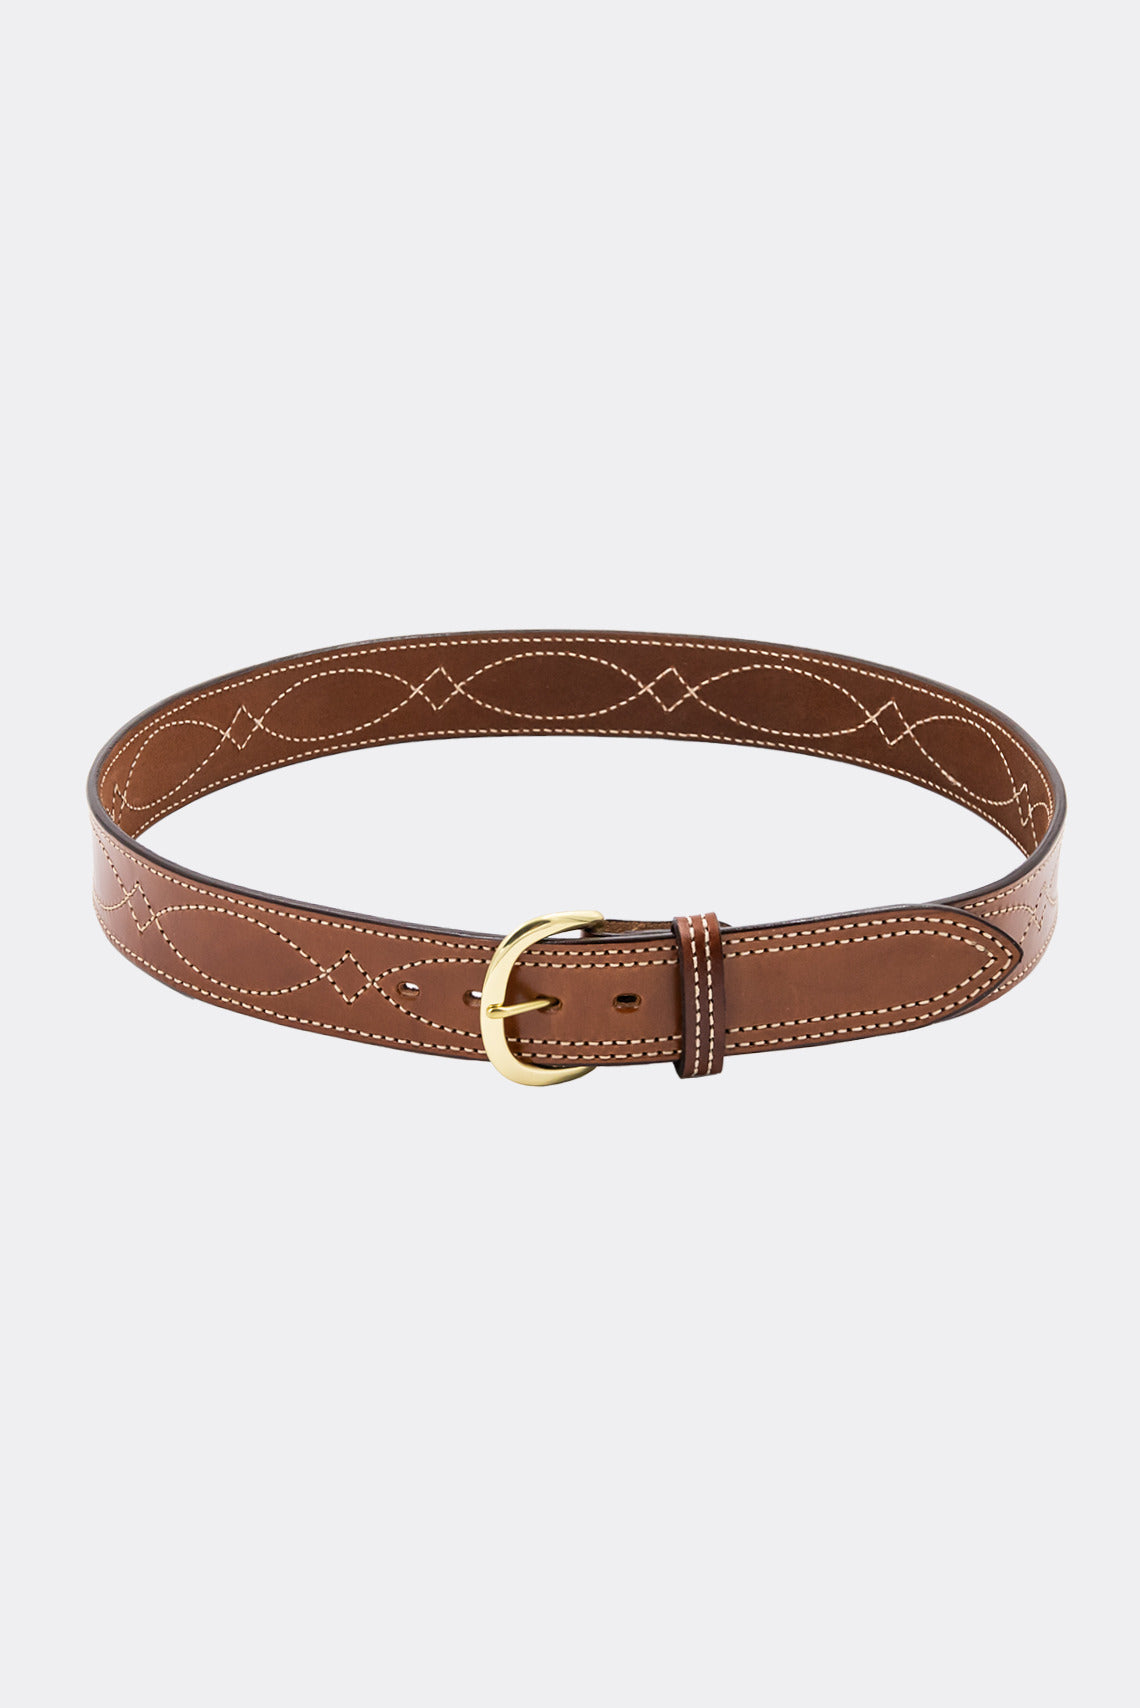 GUCCI BELT GUIDE & REVIEW - Sizing, Width & FAQs - Is it worth it? 